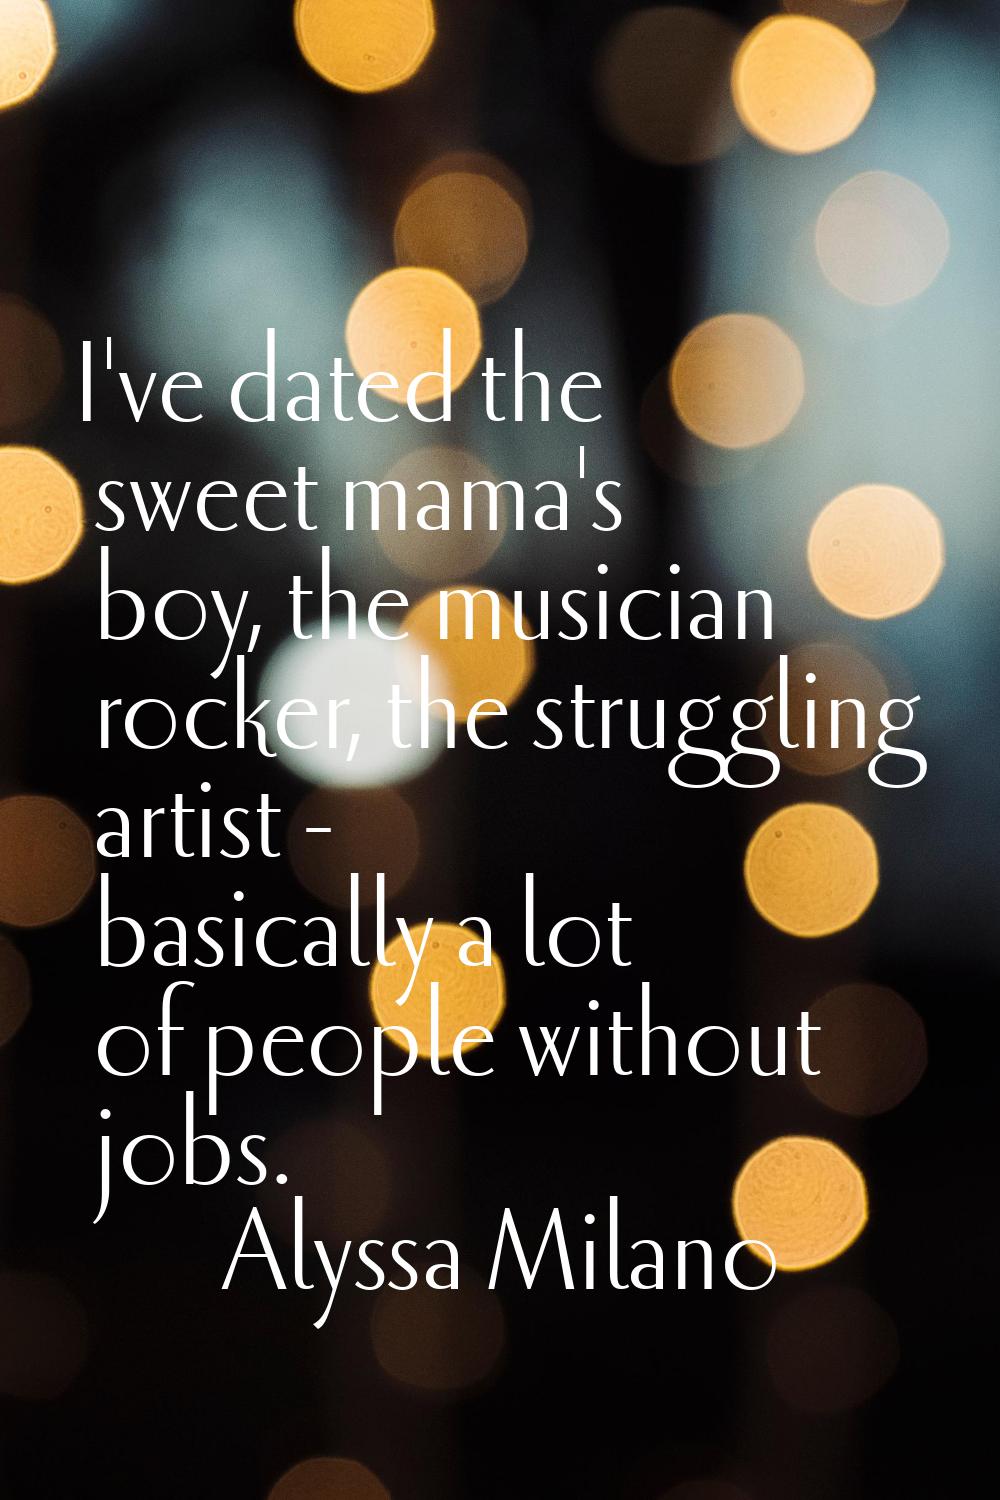 I've dated the sweet mama's boy, the musician rocker, the struggling artist - basically a lot of pe